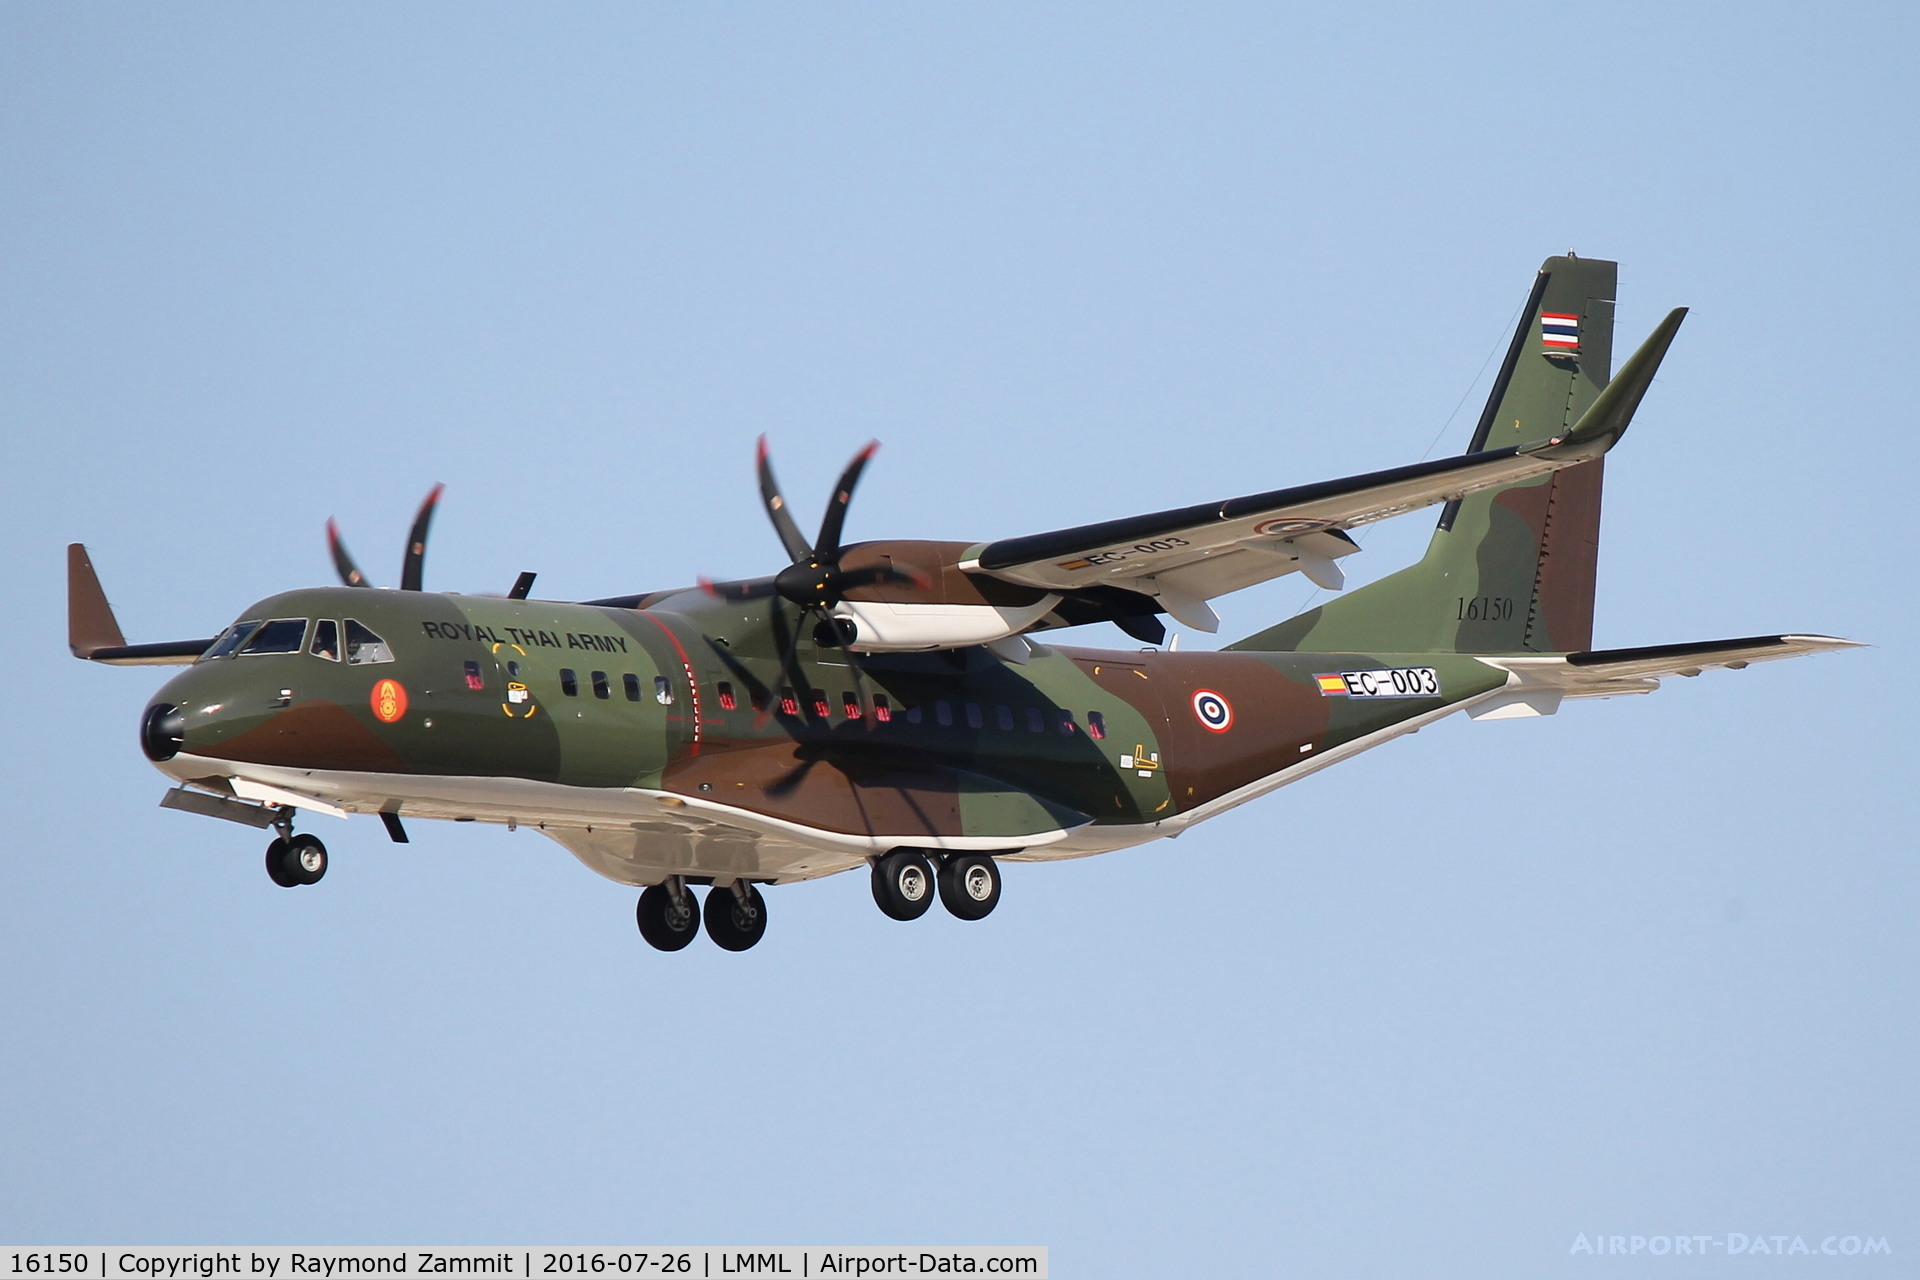 16150, 2016 CASA C-295W C/N S-150, Casa C295W 16150 Royal Thai Army landing in Malta while on delivery to Thailand